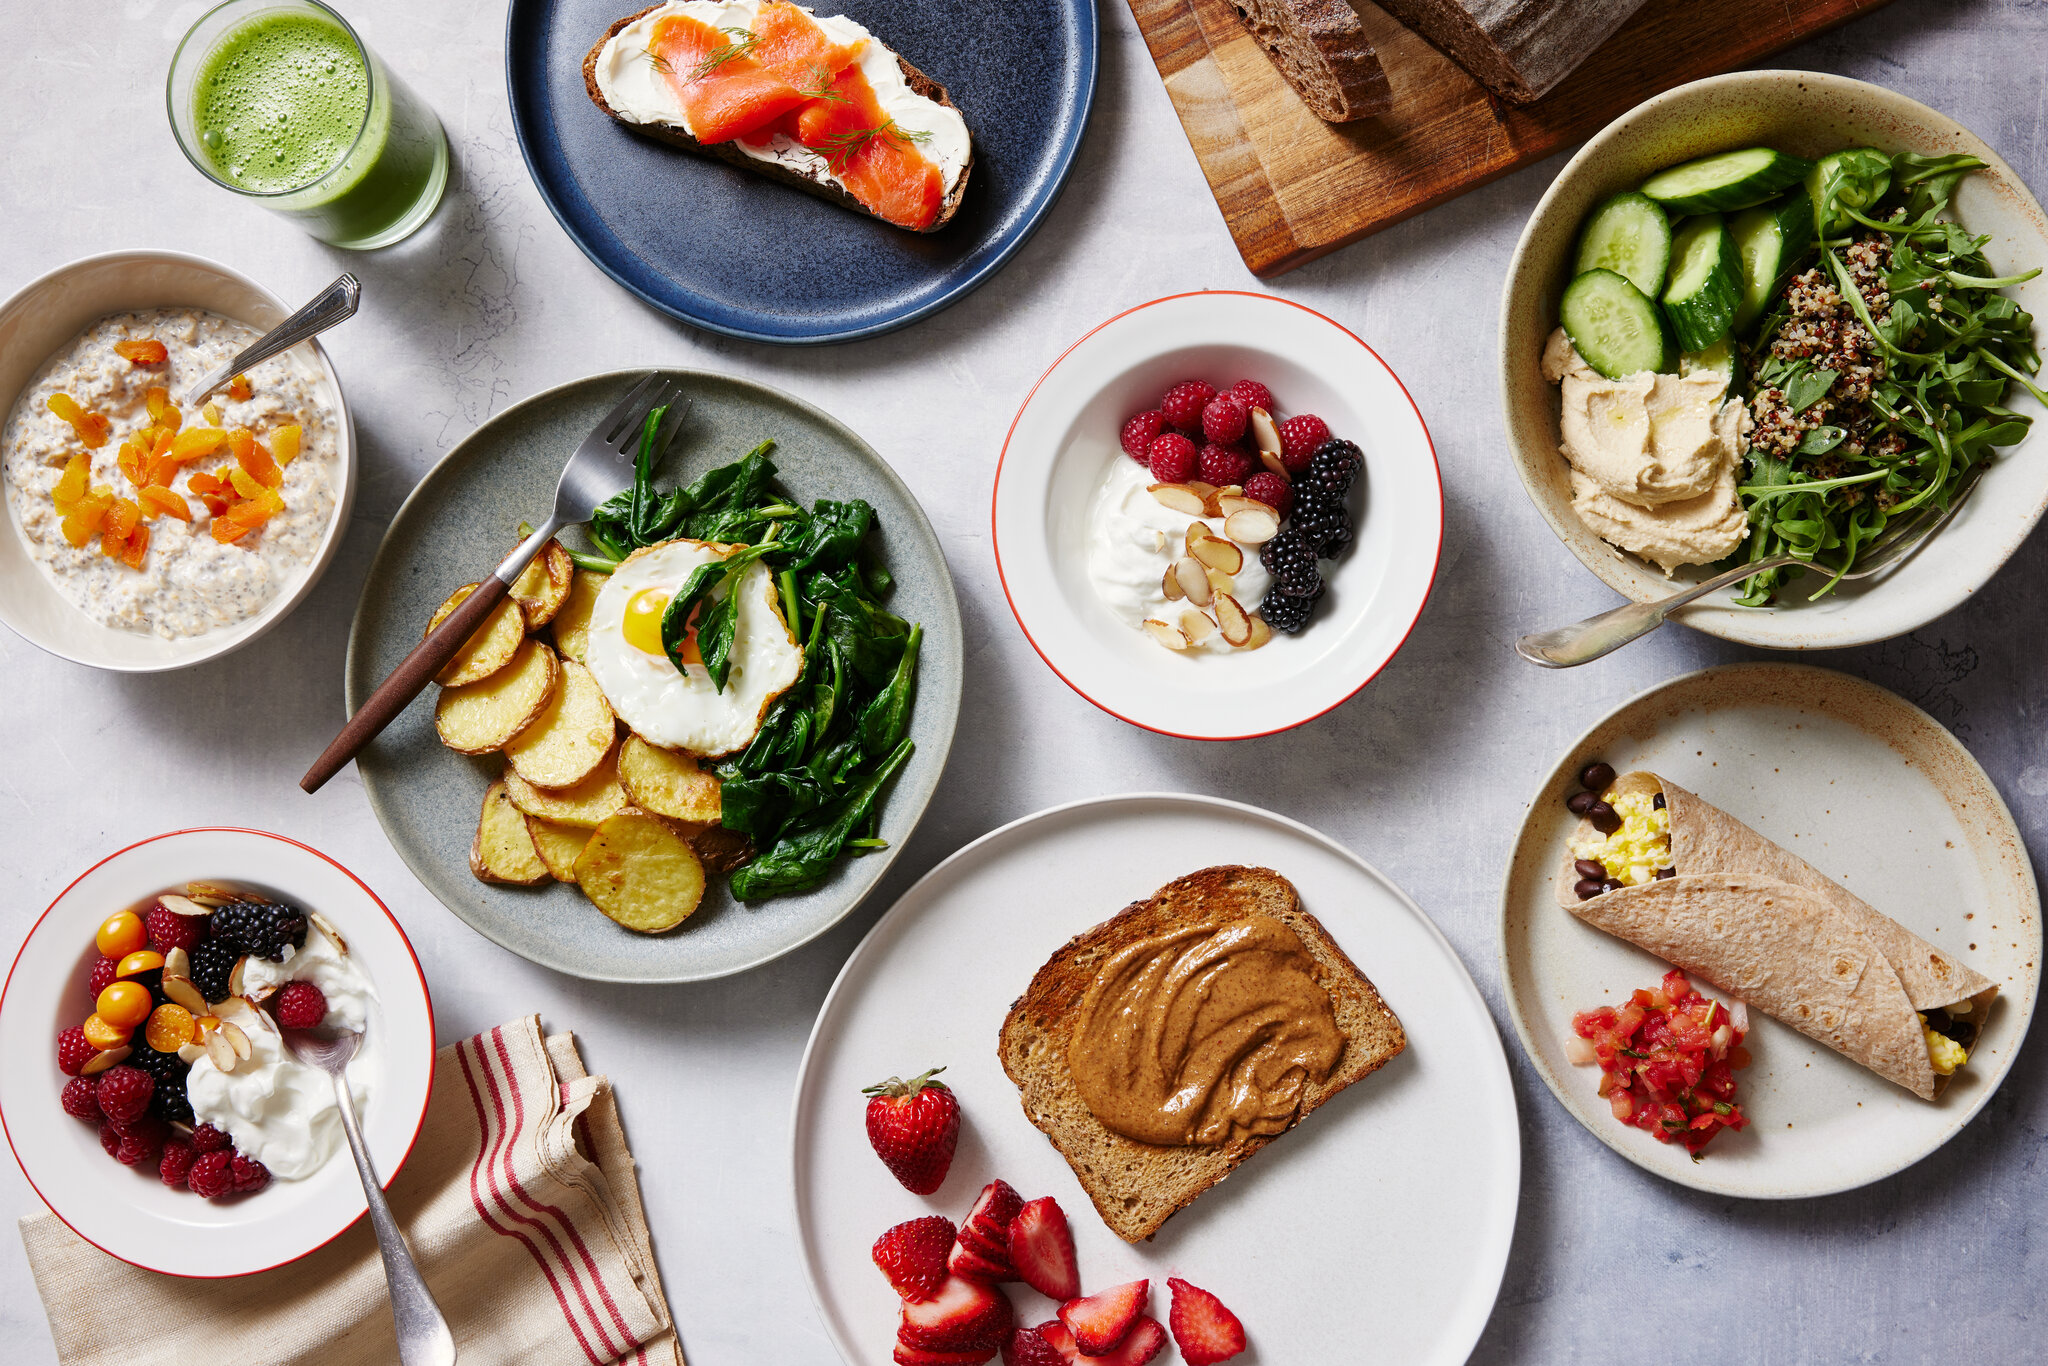 Healthy Breakfast: 7 Energizing Power Foods to Start Your Day